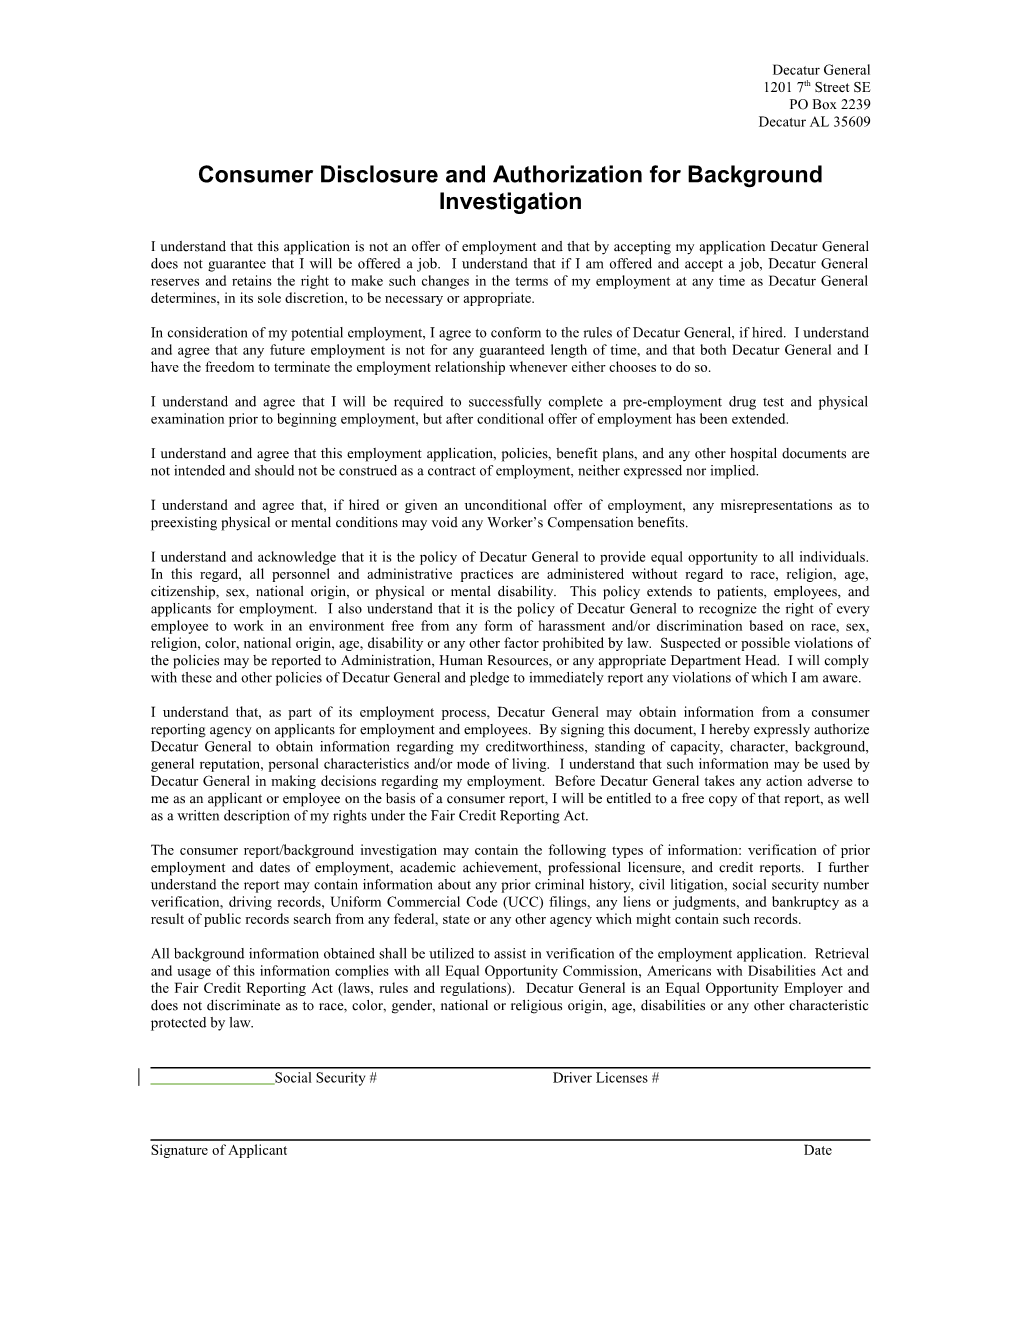 Consumer Disclosure and Authorization for Background Investigation